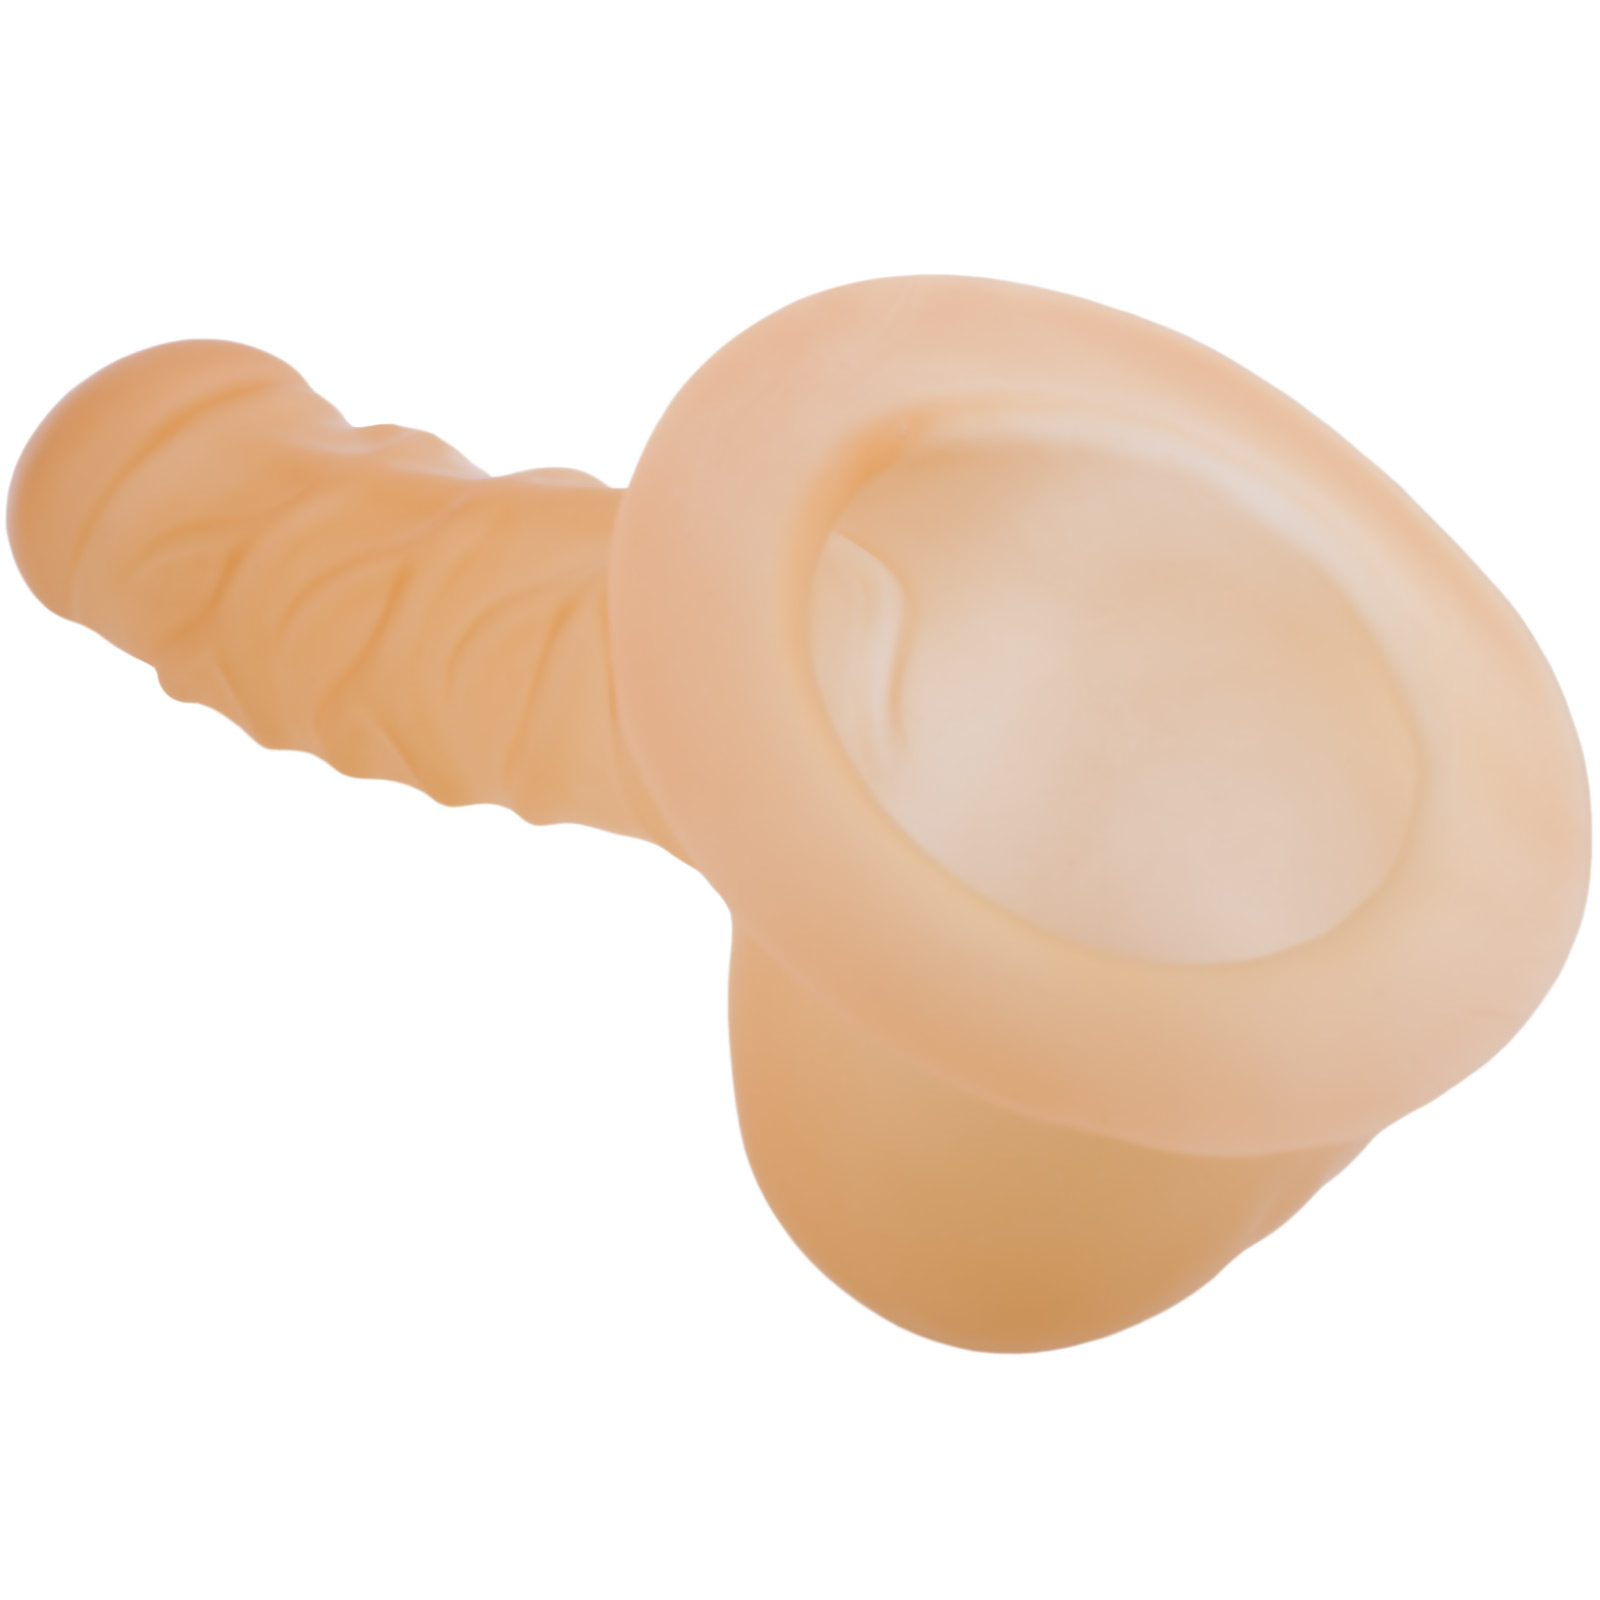 Toylie Latex Penis Sleeve «FRANZ» semi-transparent, with base plate for sticking to latex clothing - suitable for vegans